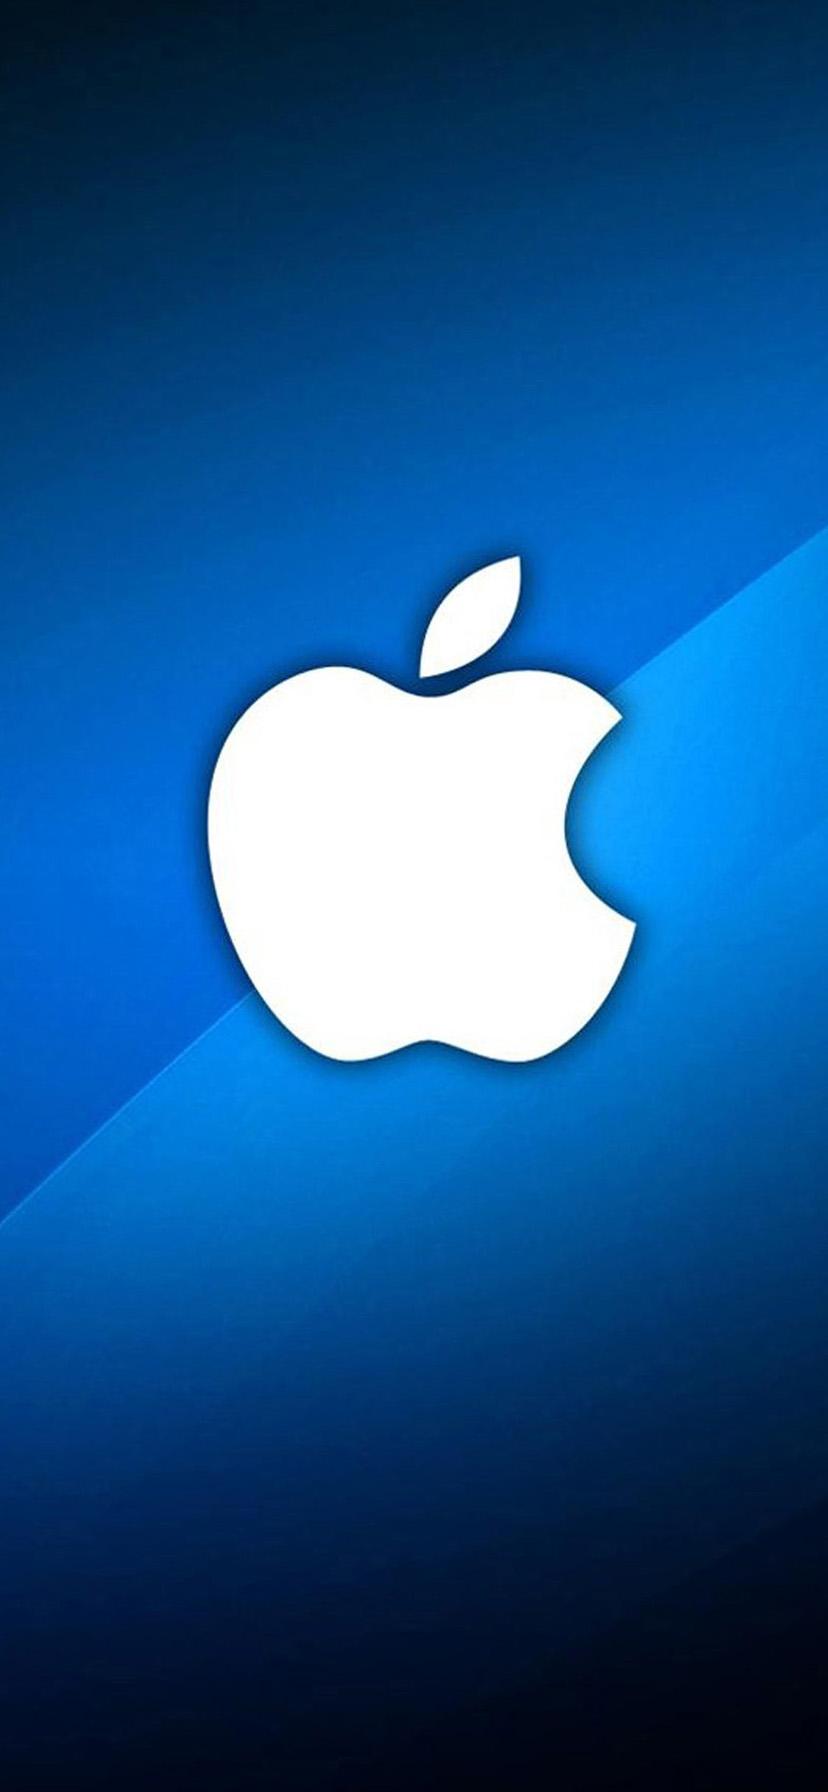 Awesome Apple Logo Wallpaper Iphone Xr wallpaper